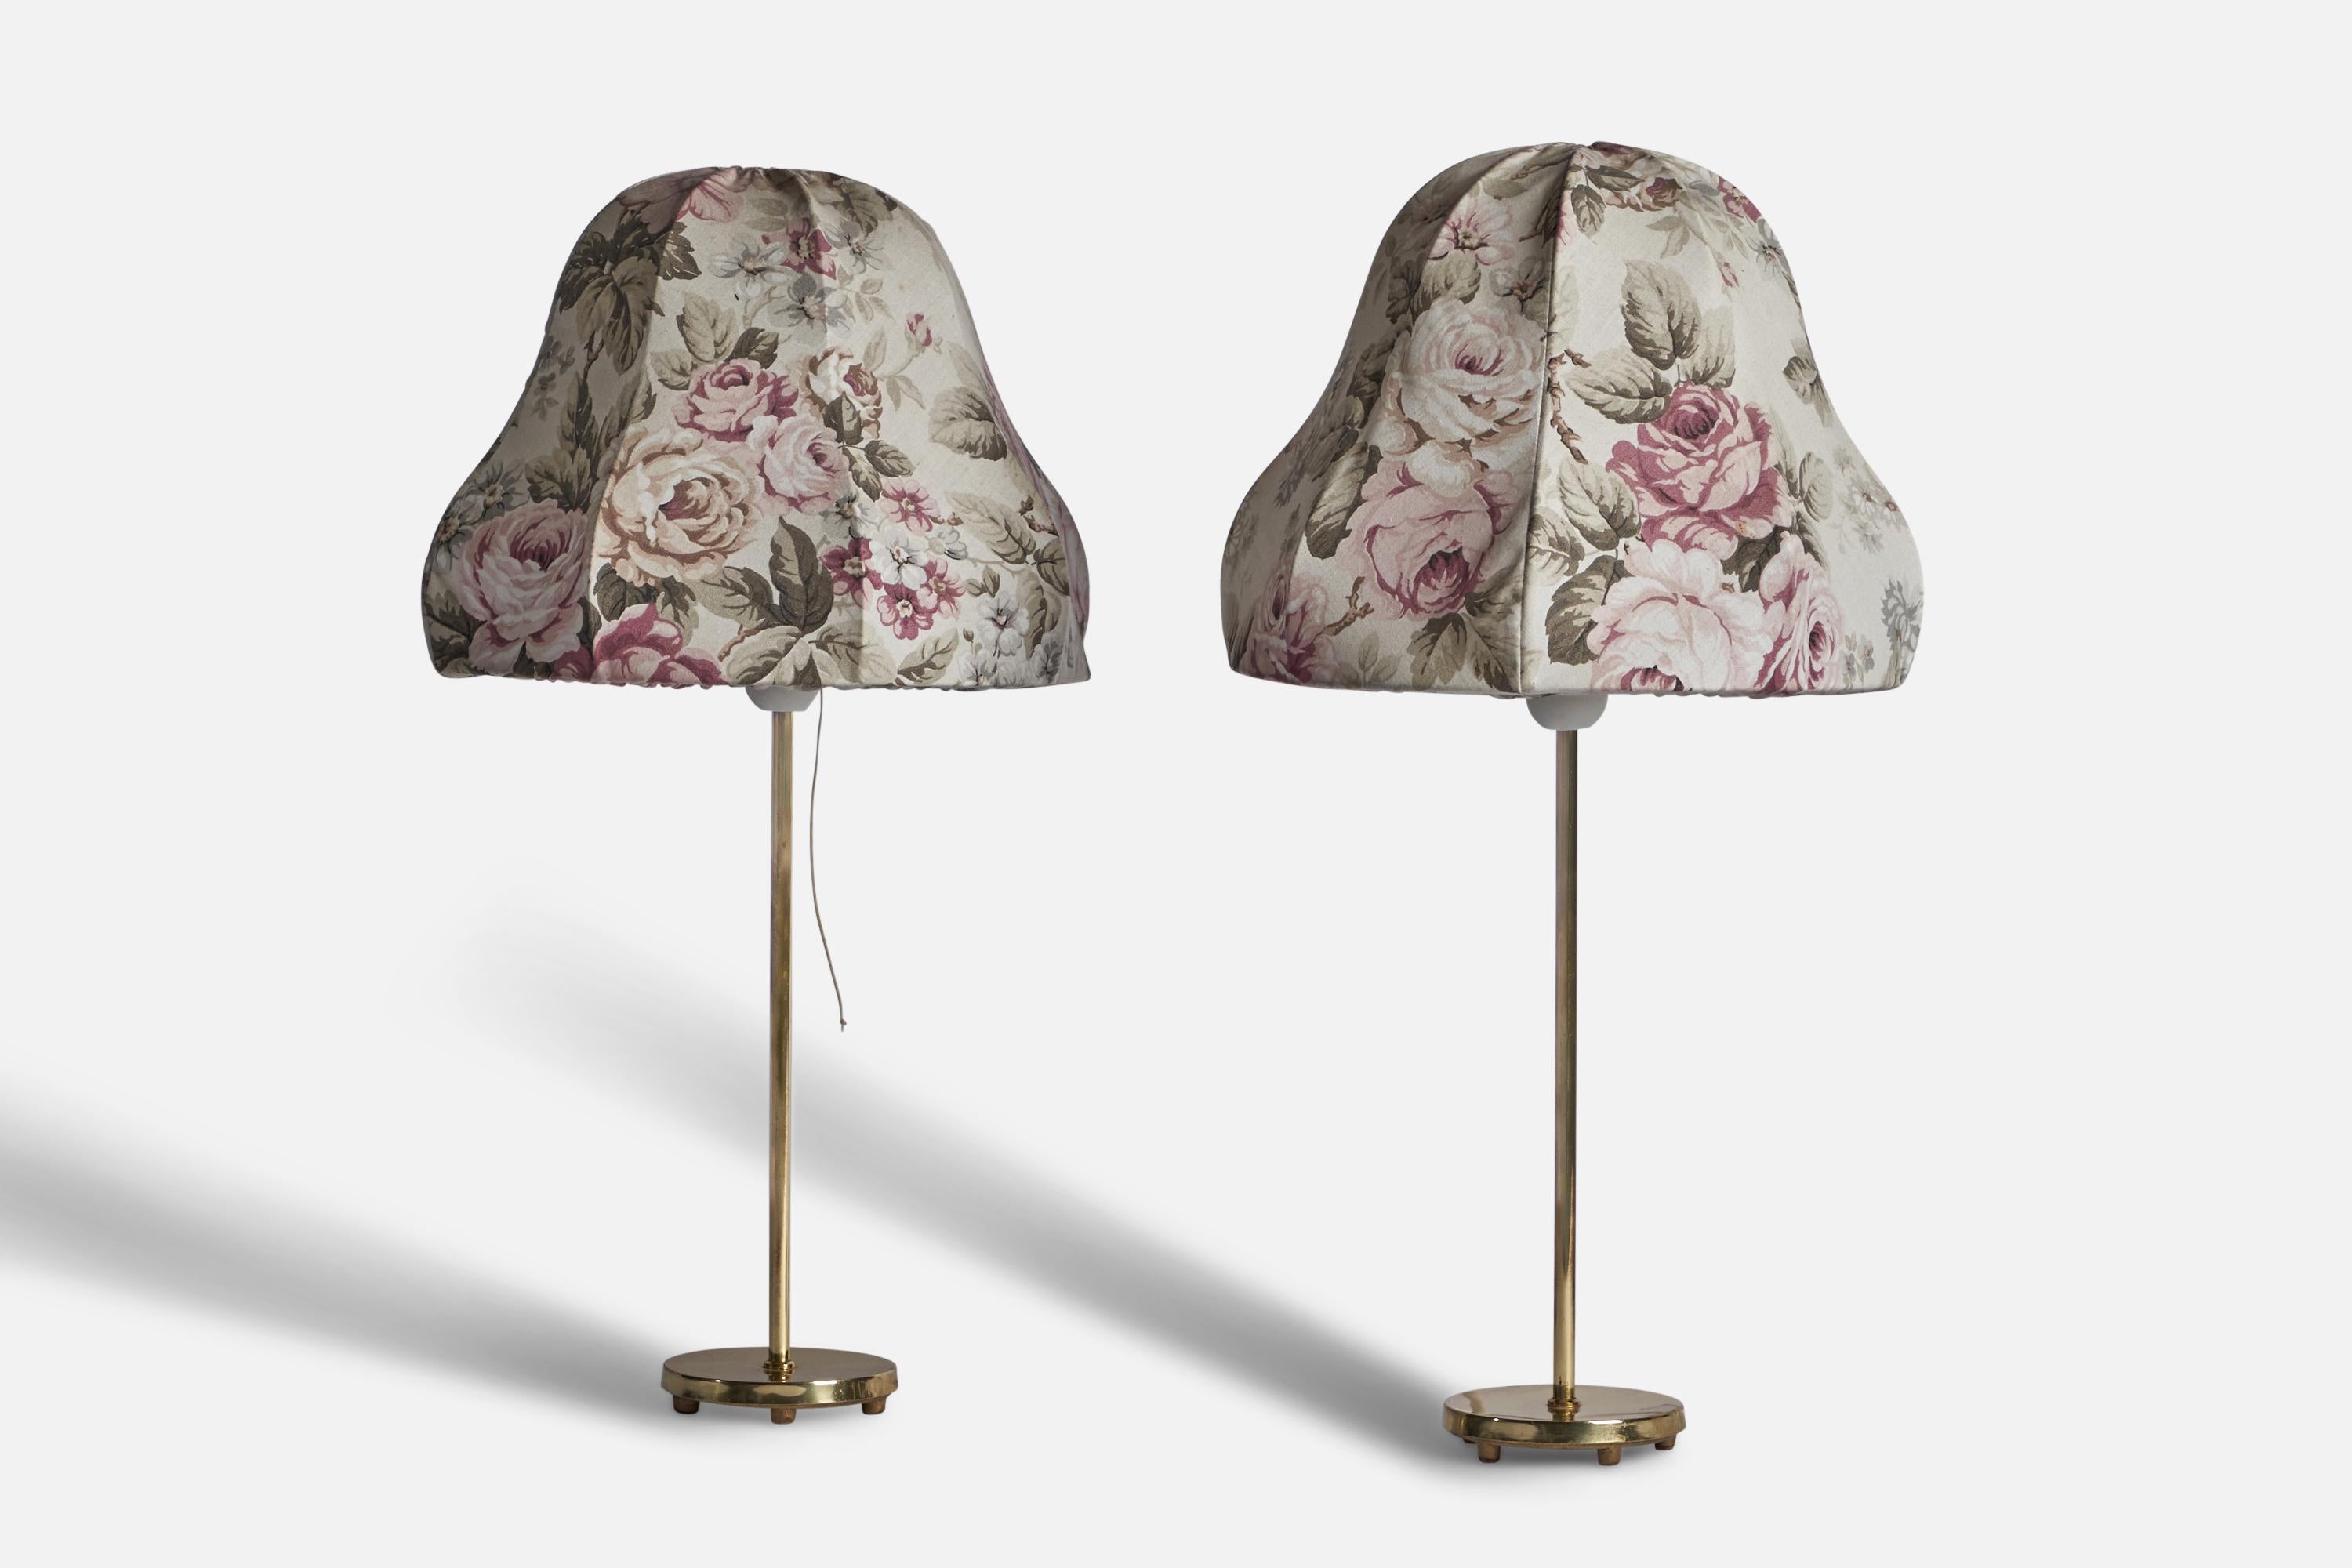 A pair of brass and floral printed fabric table lamps designed and produced in Sweden, c. 1940s.

Overall Dimensions (inches): 20.5” H x 11.5” Diameter

Bulb Specifications: E-26 Bulb

Number of Sockets: 1